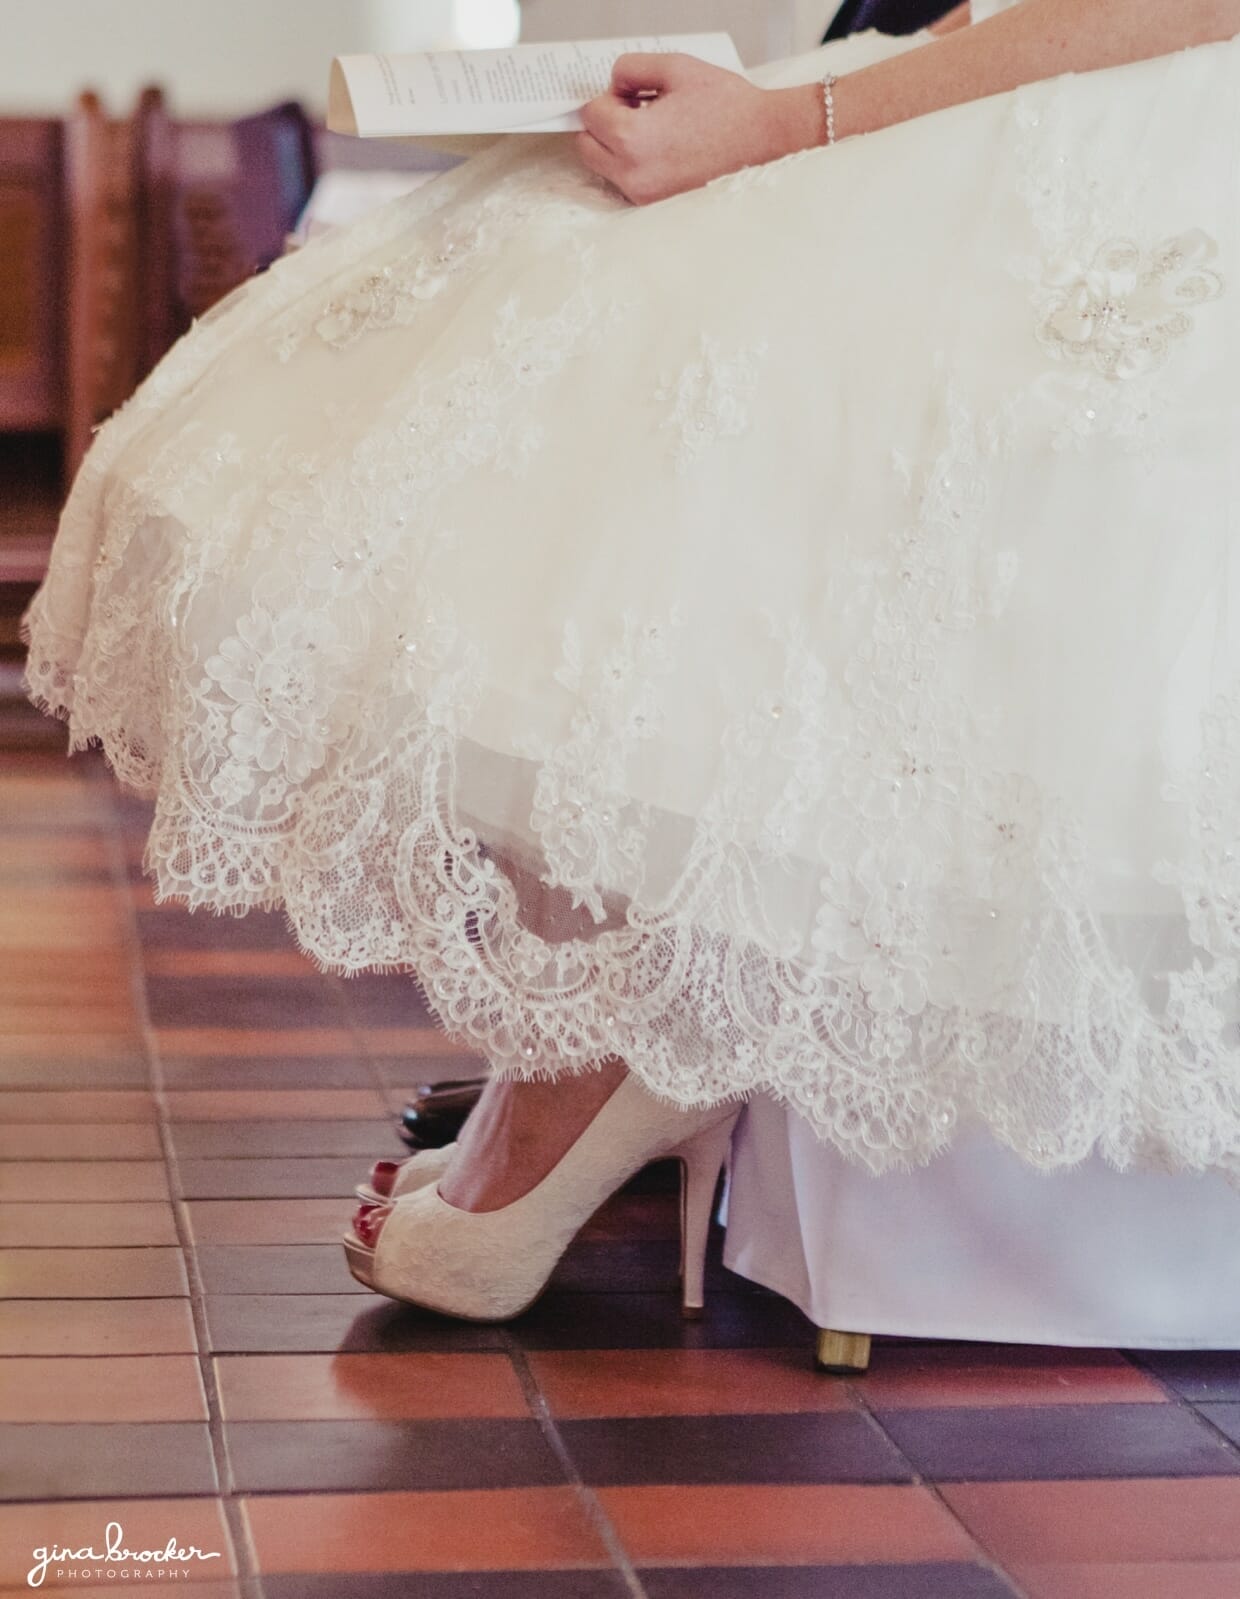 A detail of the brides lace tea length vintage inspired wedding dress during her church ceremony